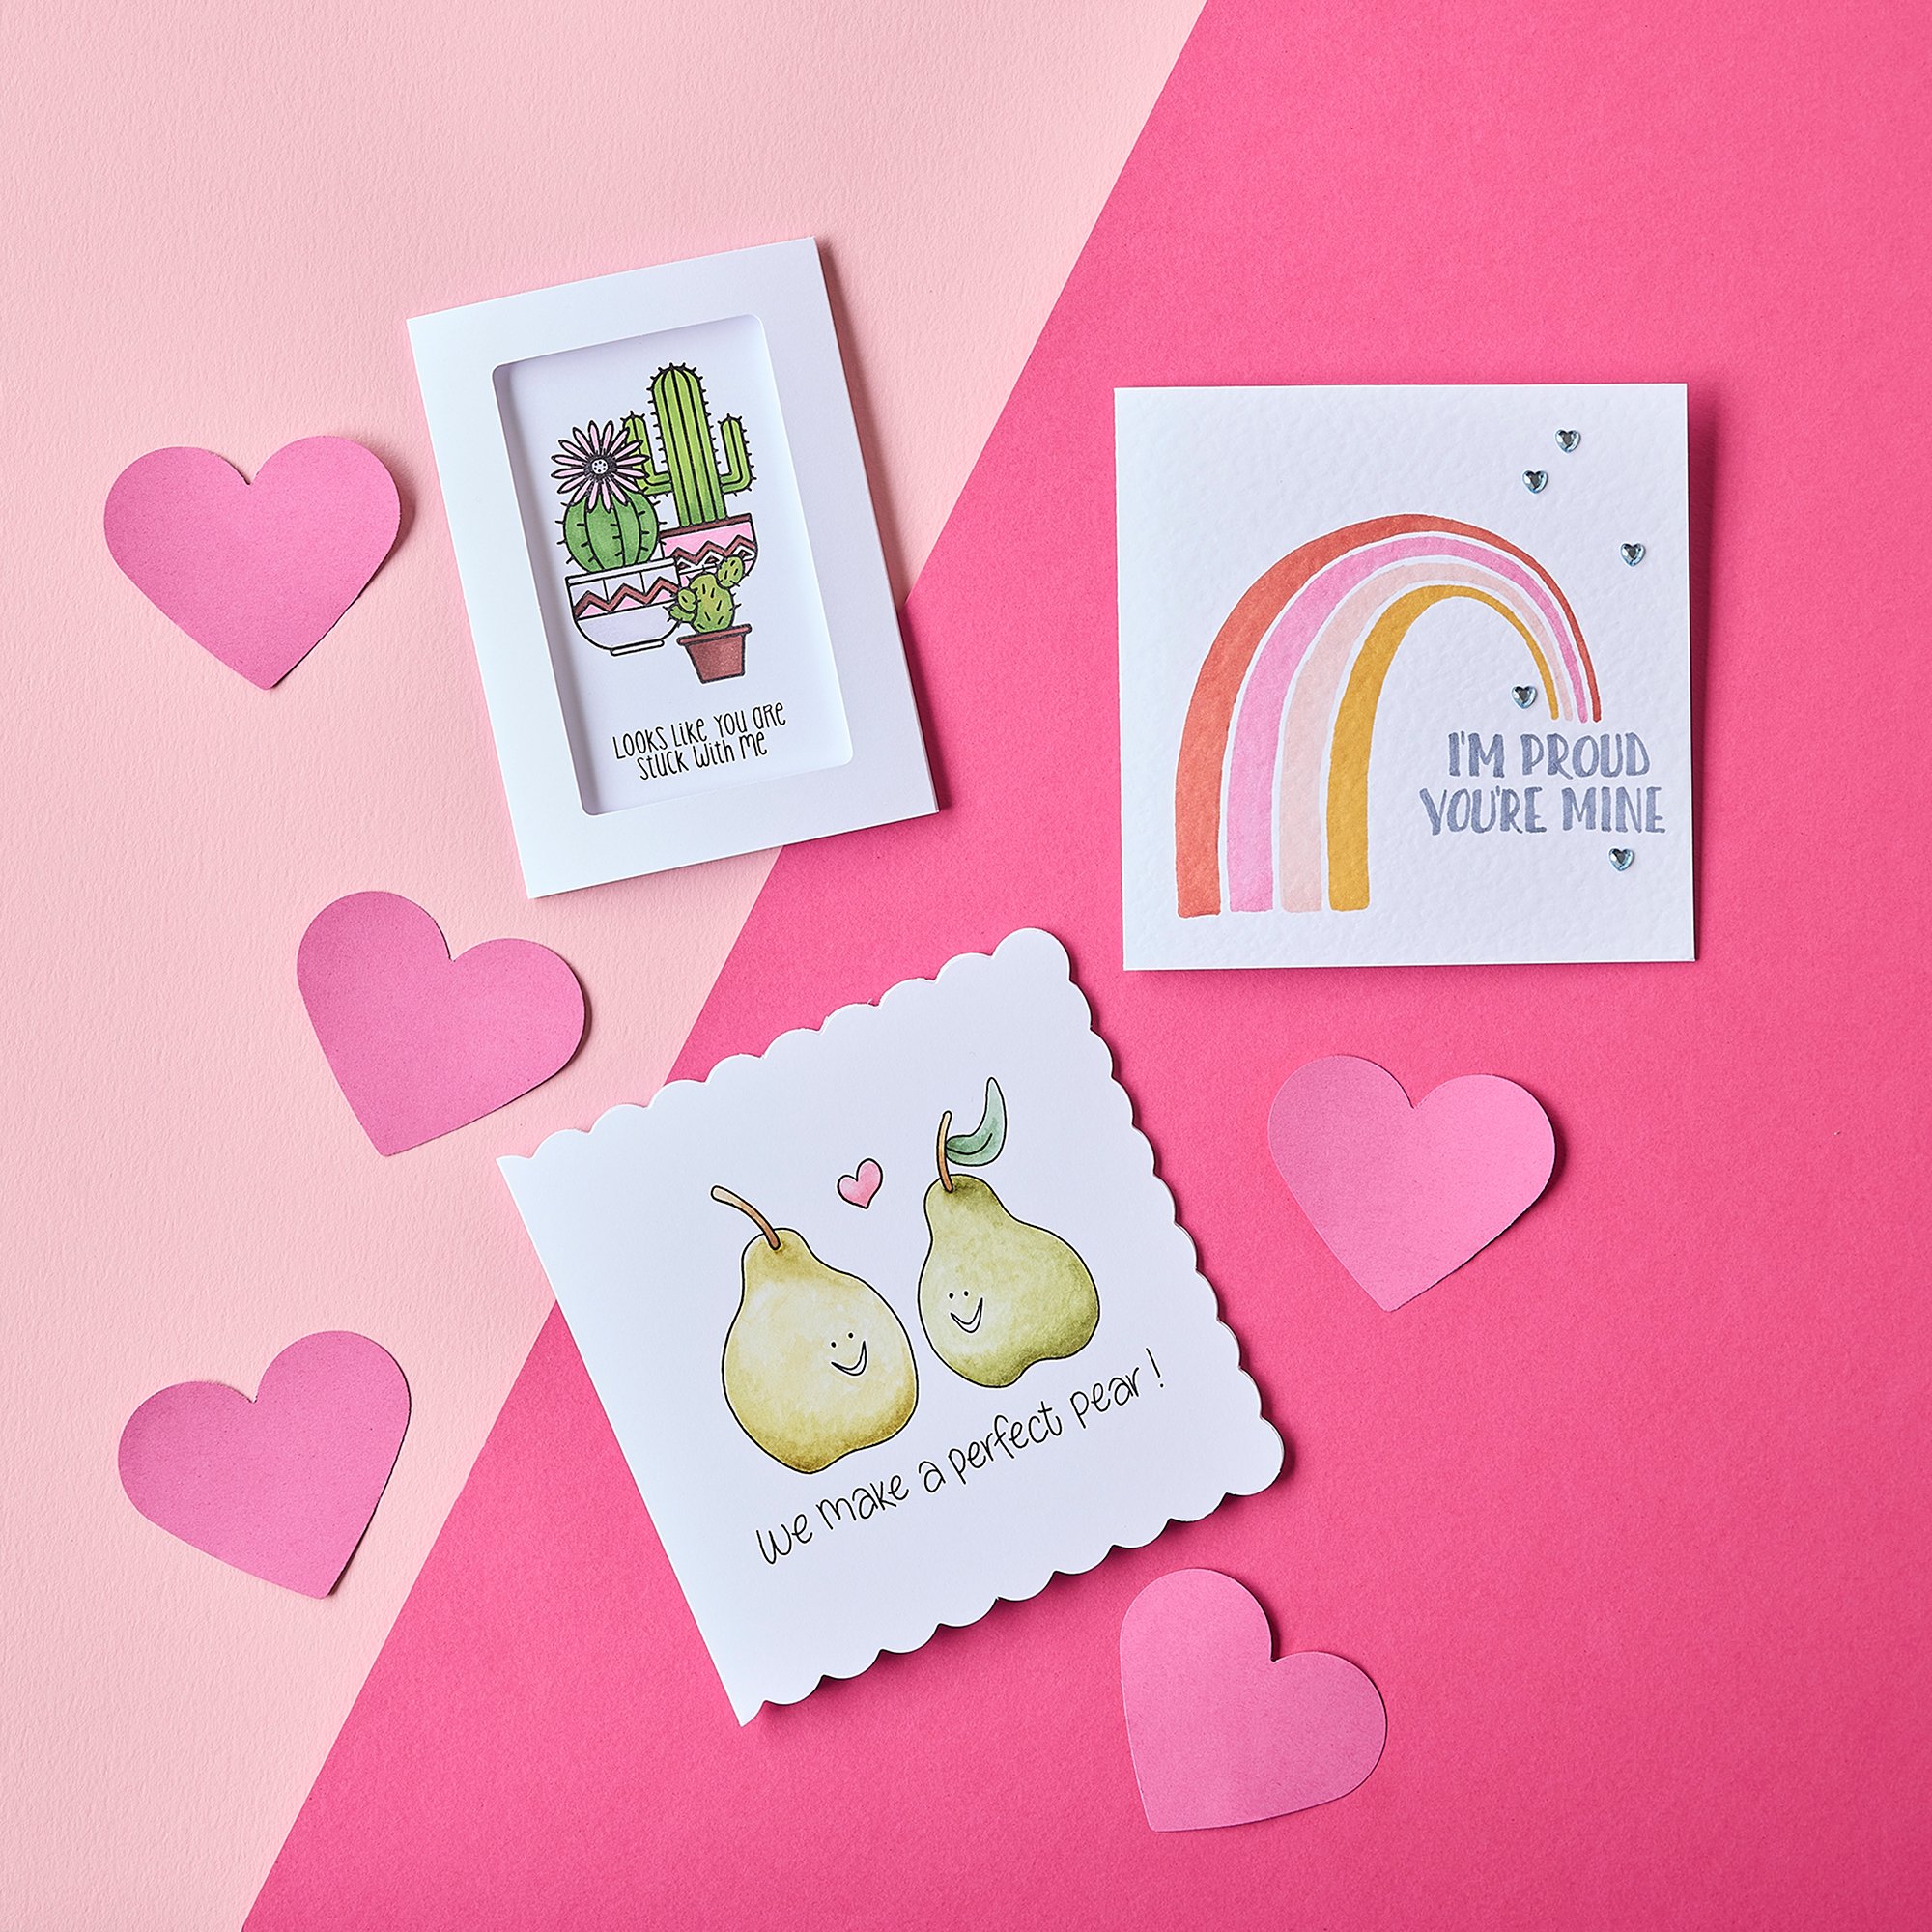 The Best Valentine's Day Cards for Your Fiancé or Fiancée